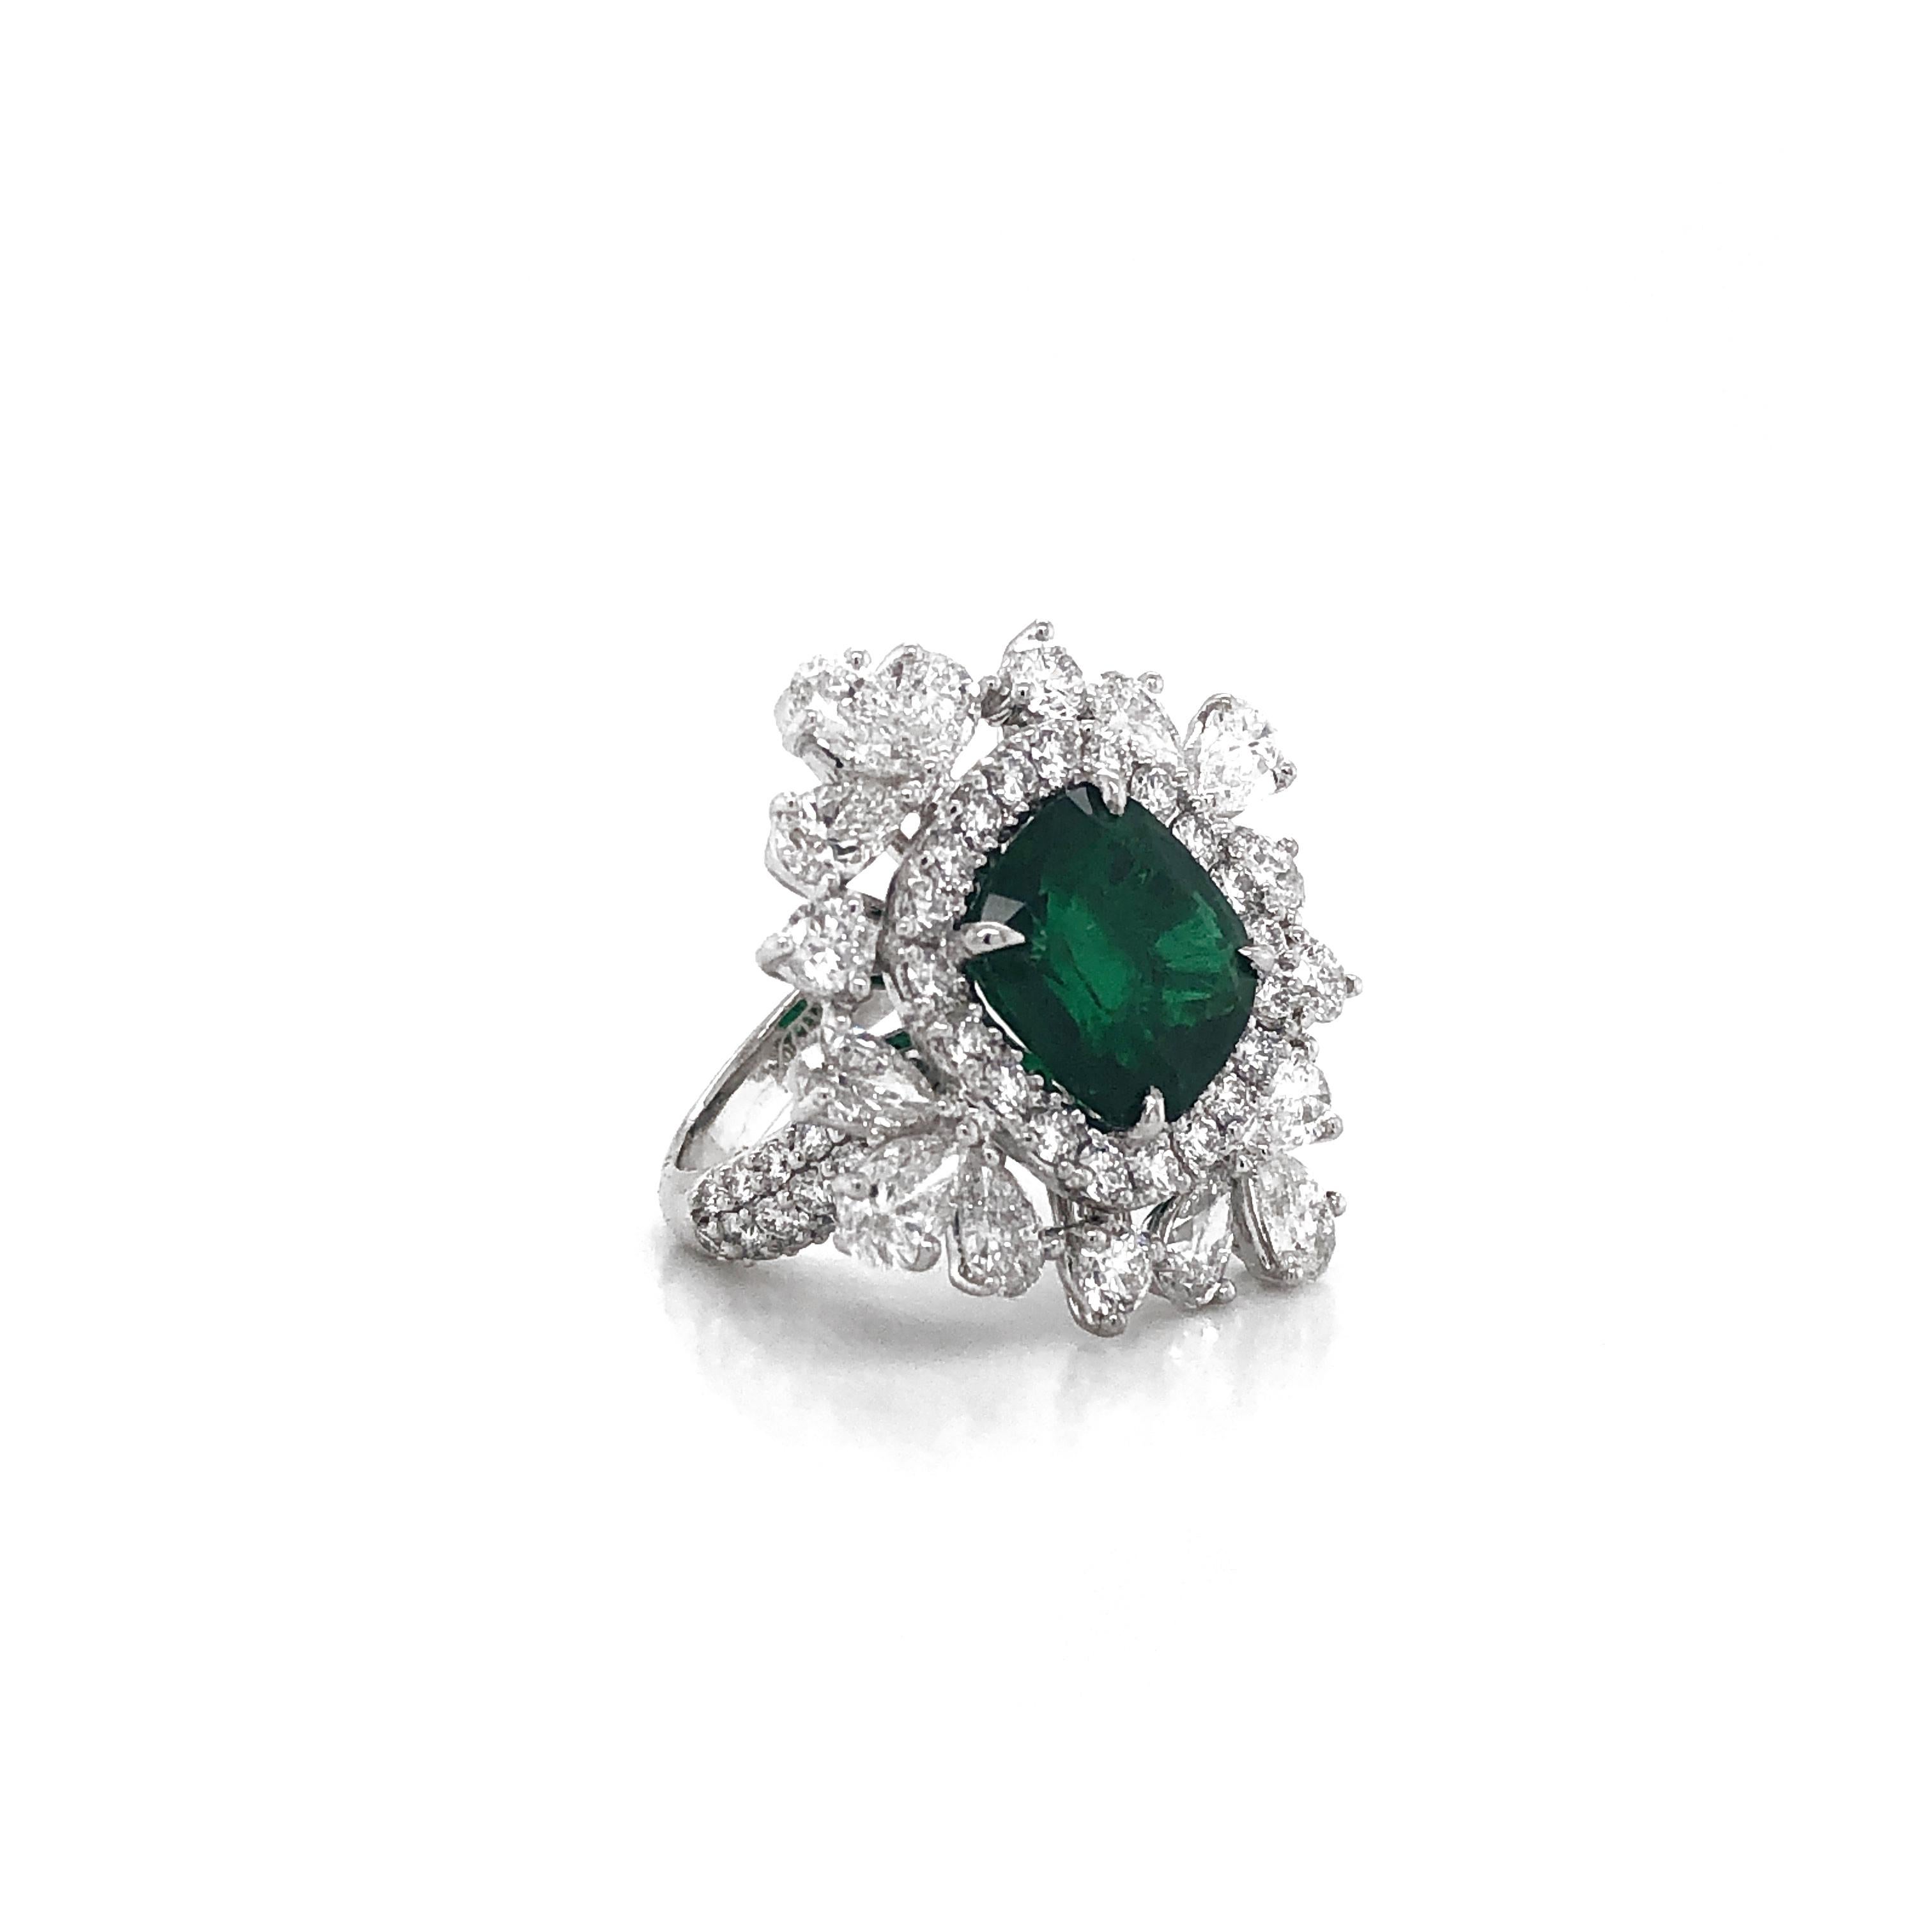 Contemporary Certified Zambian Cushion Cut Emerald 4.65 Carat Diamond Platinum Cocktail Ring For Sale